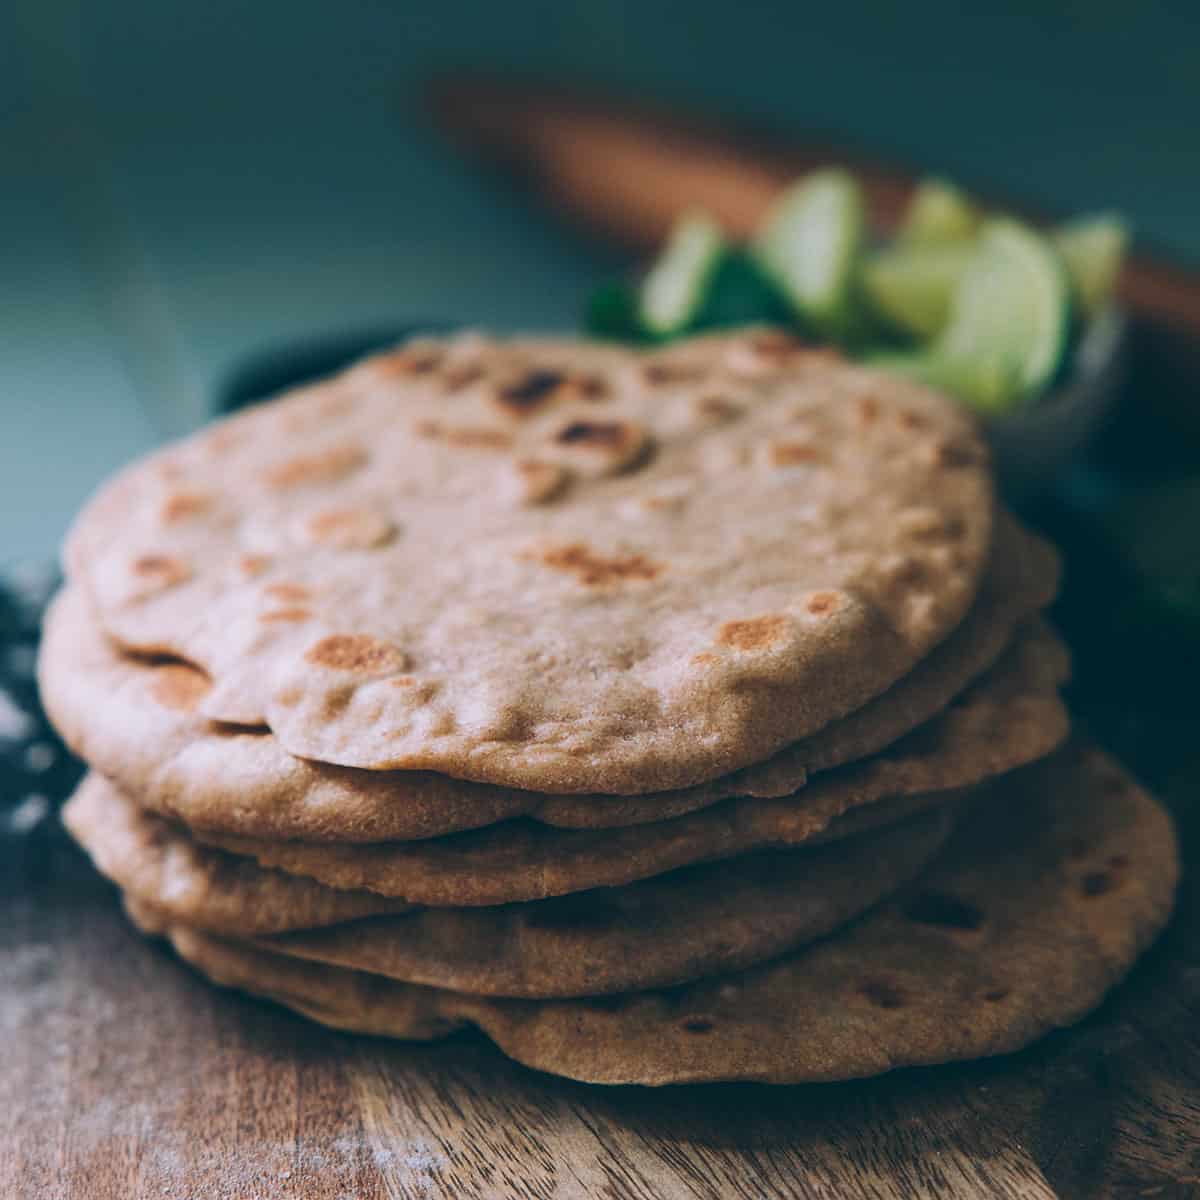 A stack of whole wheat sourdough flatbreads on a wood surface with limes in the background. 